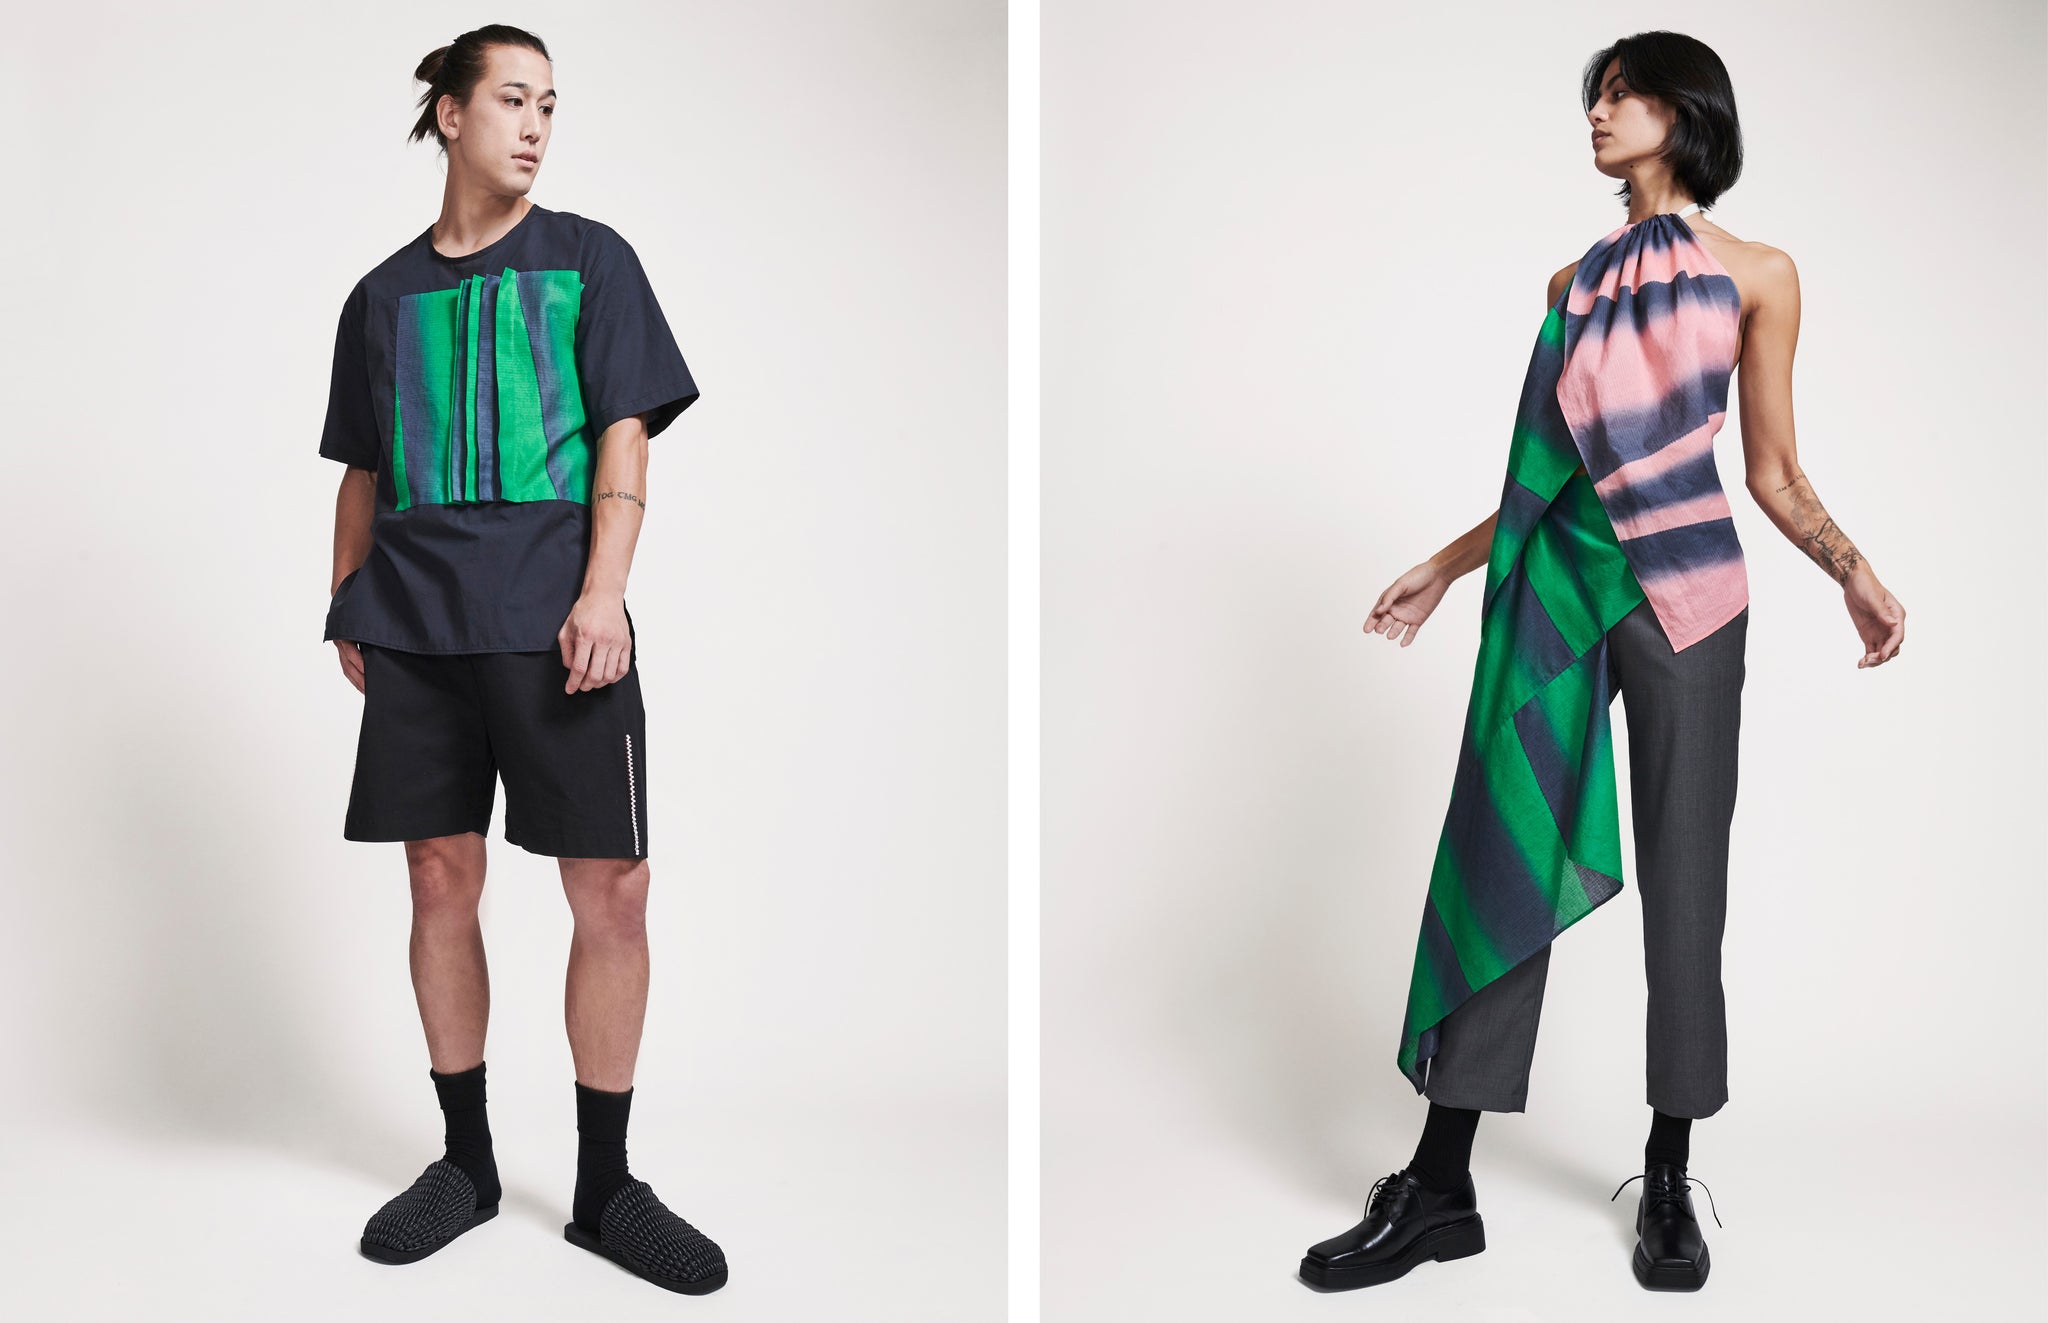 Male model in navy and green t-shirt and shorts on the left, green and pink draped look on female model on the right